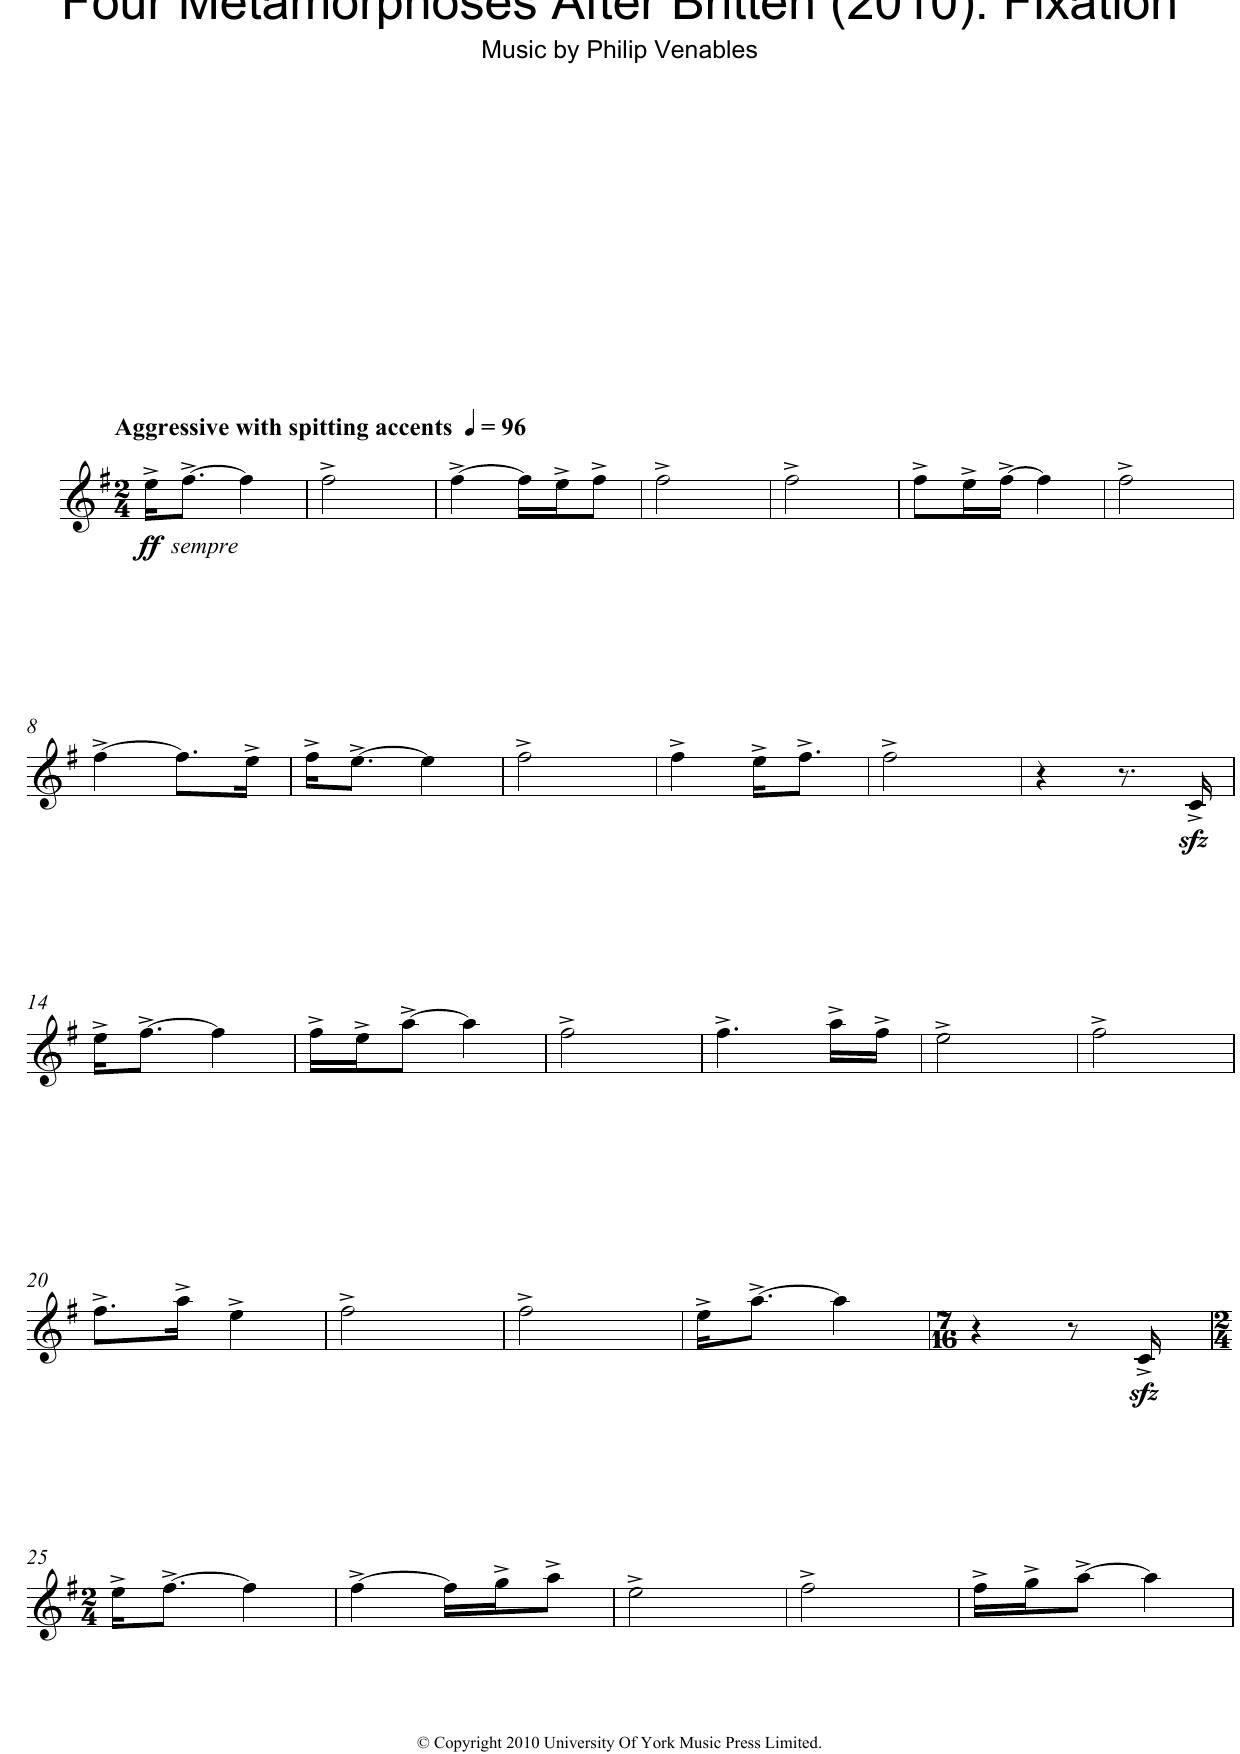 Philip Venables Four Metamorphoses After Britten (2010): Fixation sheet music notes and chords arranged for Oboe Solo